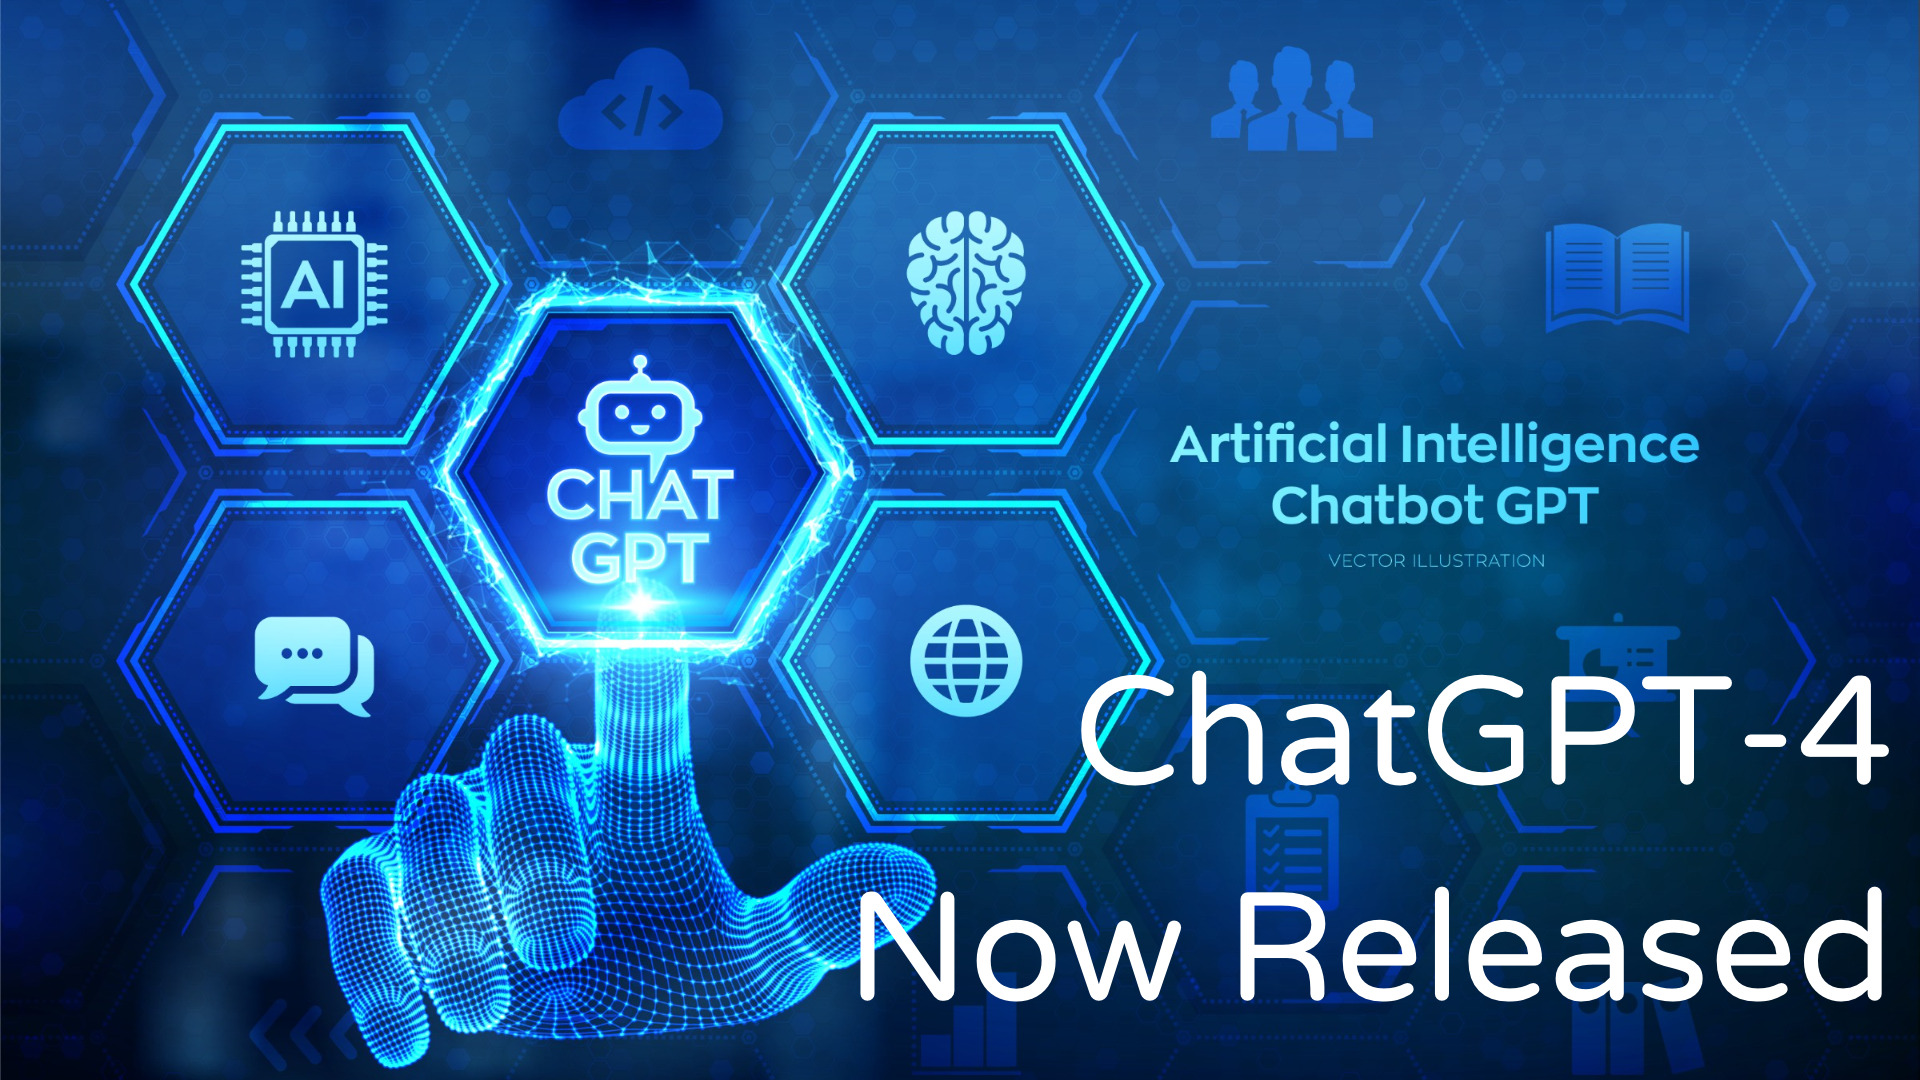 Now Released ChatGPT 4 in Fort Lauderdale